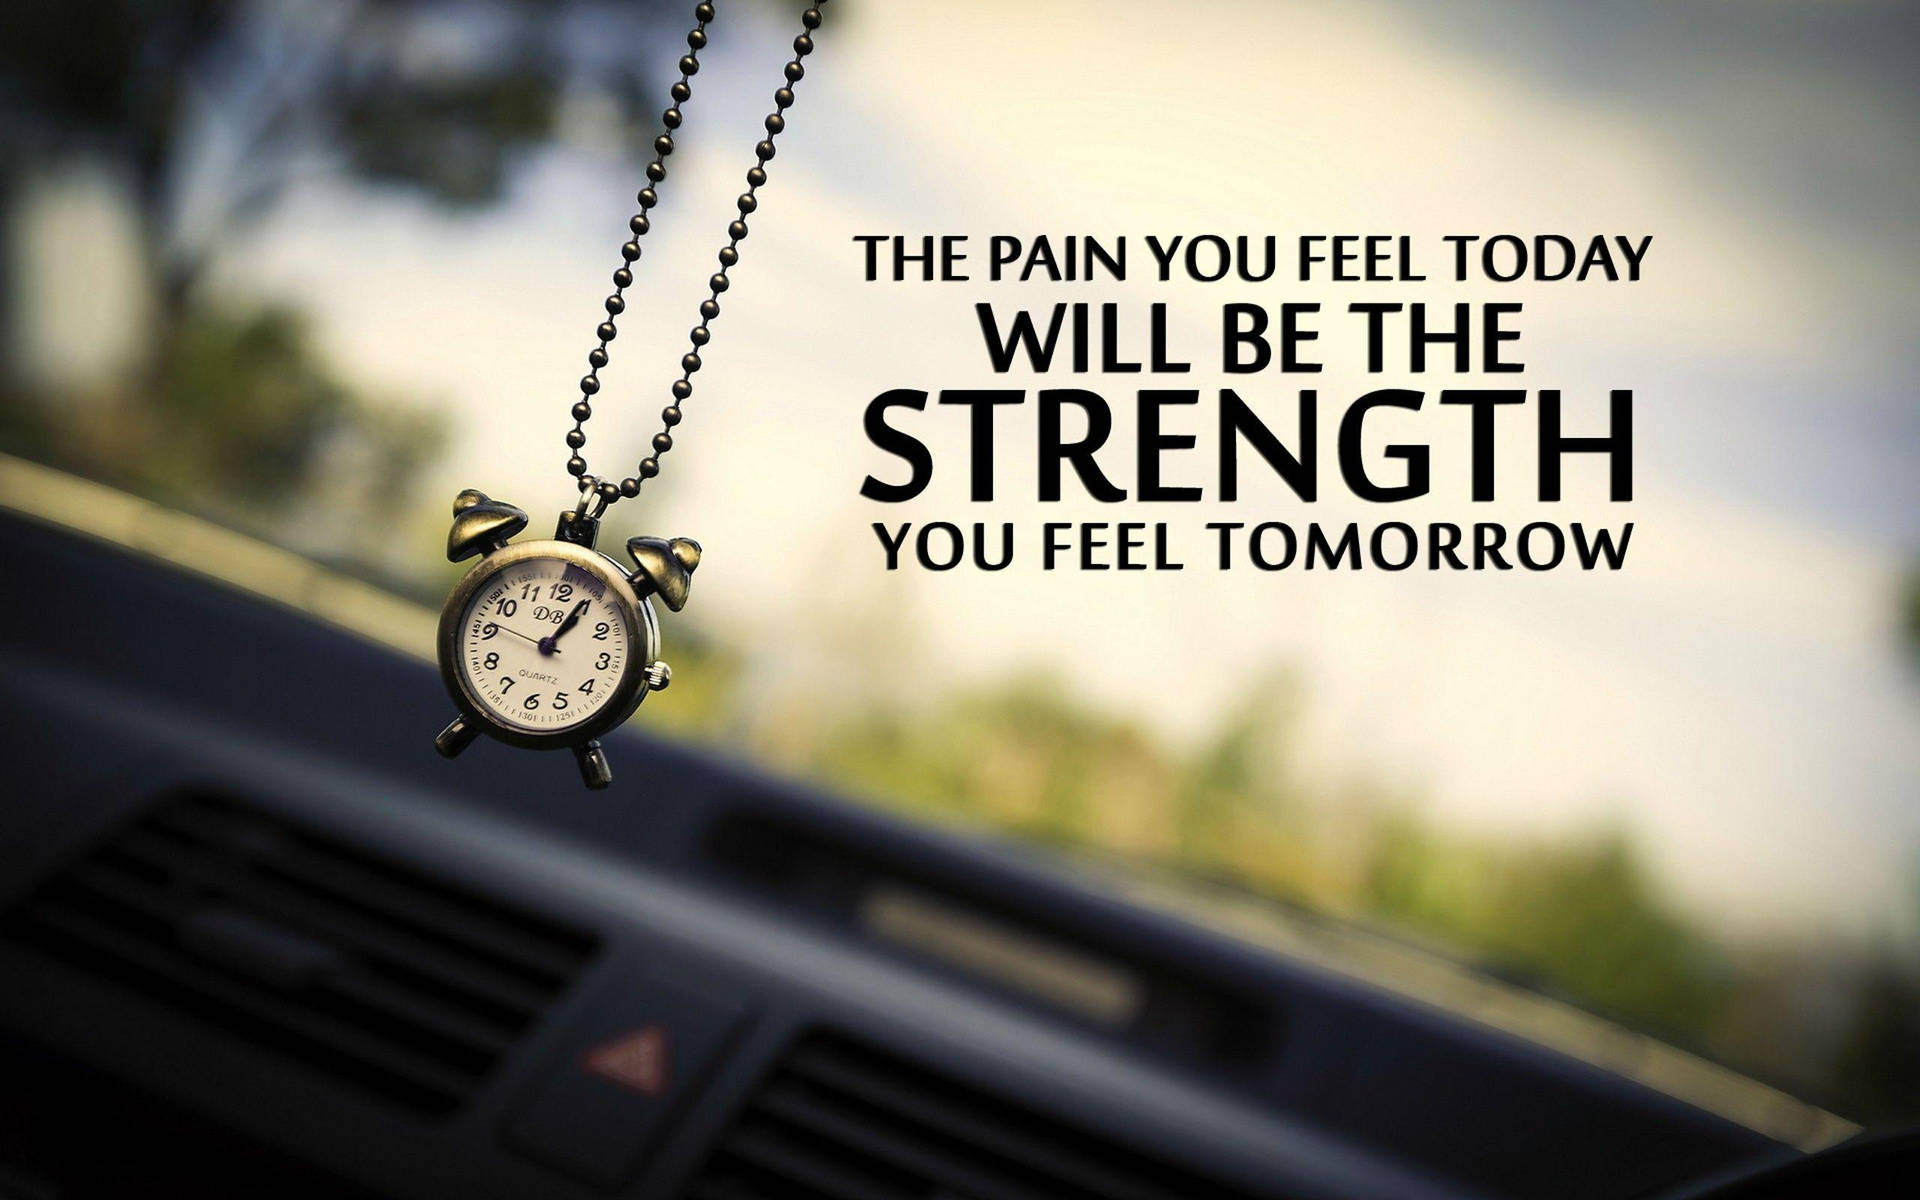 Motivational Hd Image Giving Strength Background